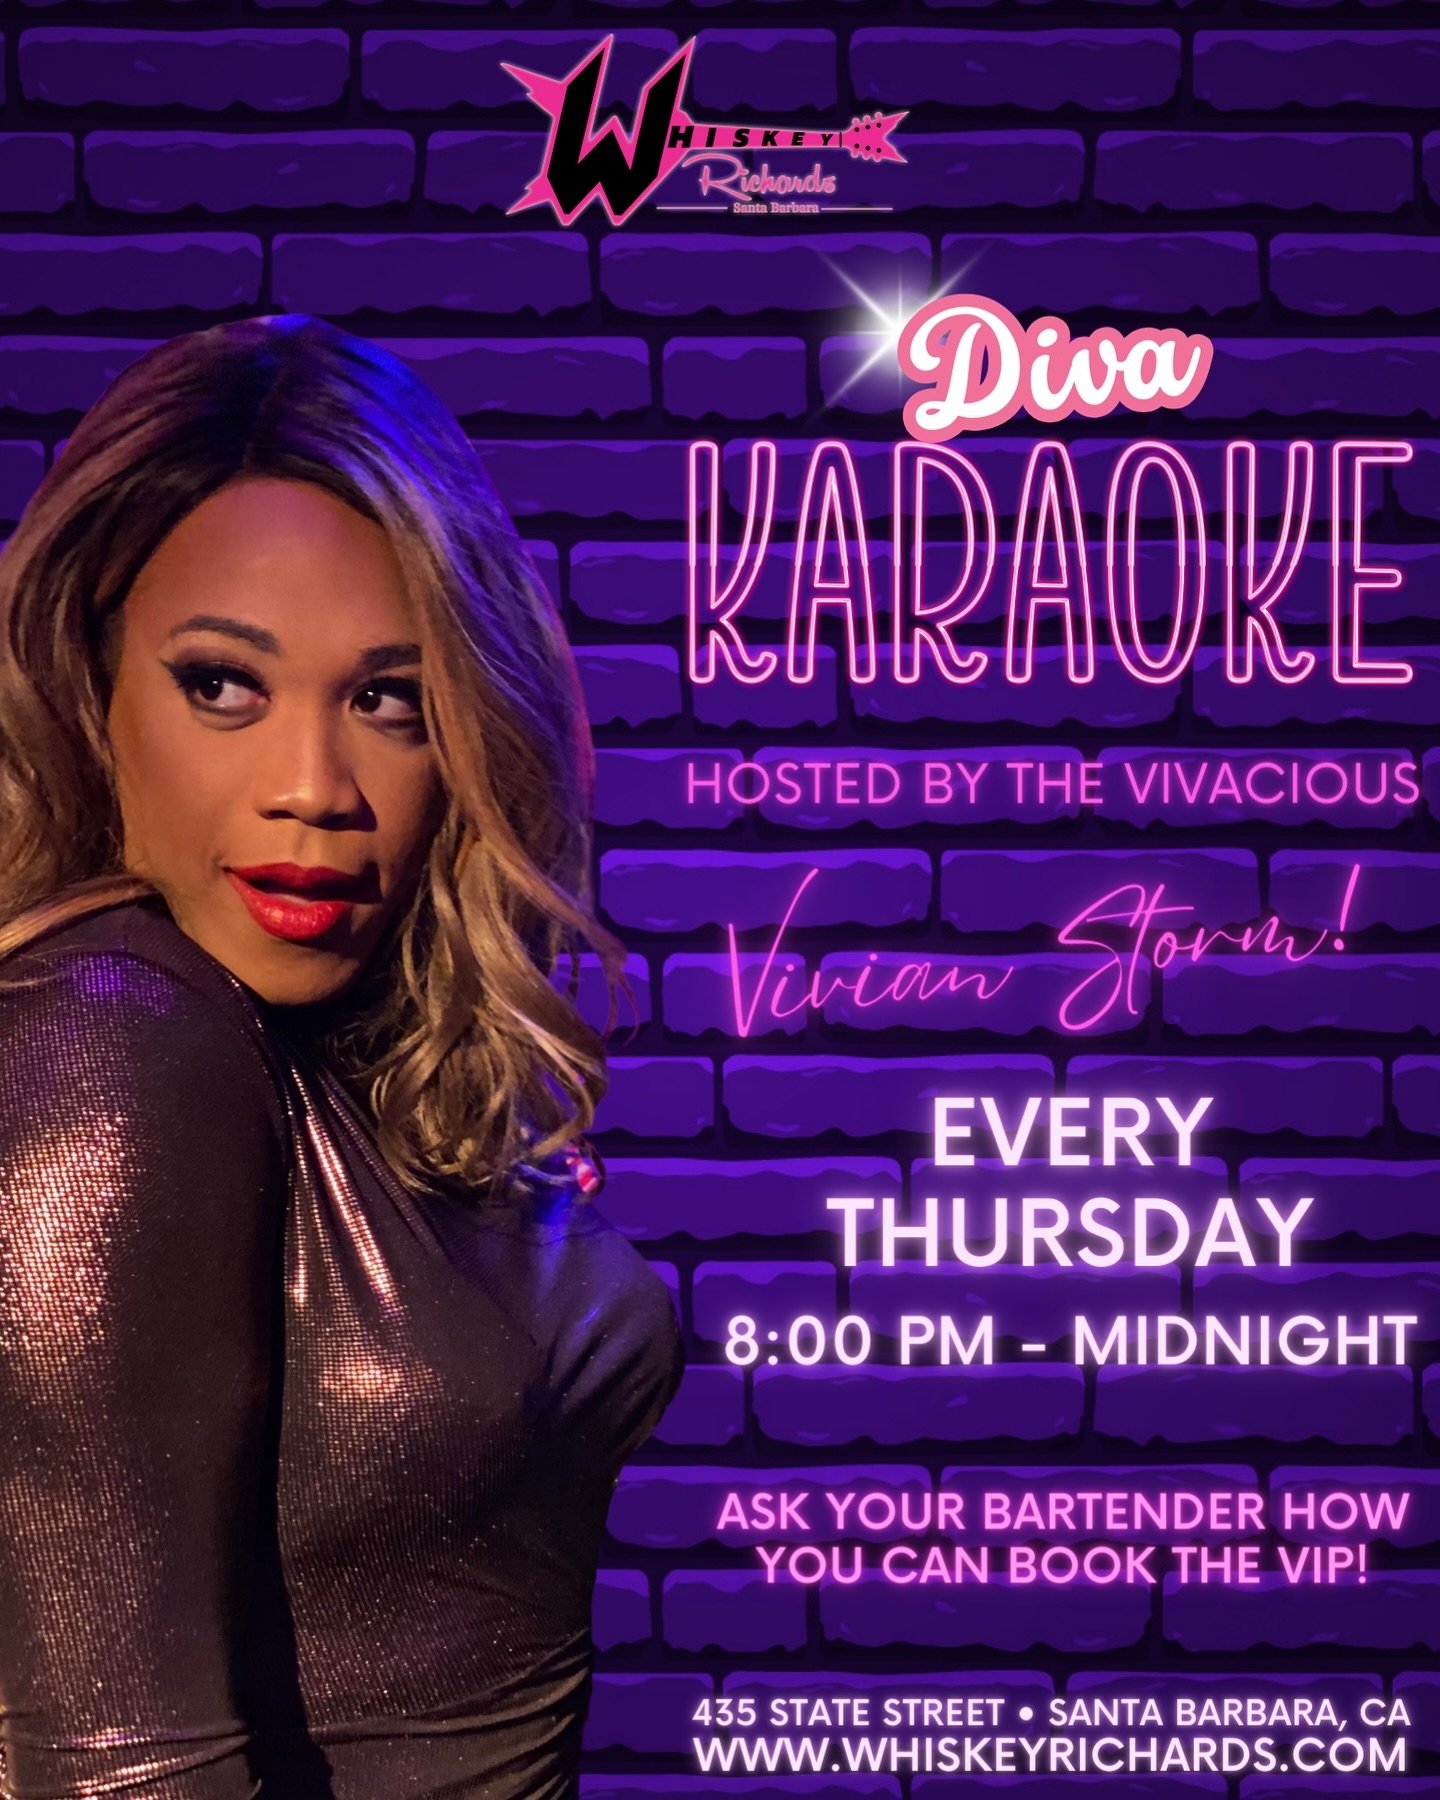 Is it possible?! WhiskSHE Richards got EVEN MORE fabulous?! Diva Karaoke will now be hosted EVERY THURSDAY, starting TONIGHT at 9 pm! Get ready to unleash your inner diva at Diva Karaoke hosted by the fabulous Vivian Storm! Join us at Whiskey Richard